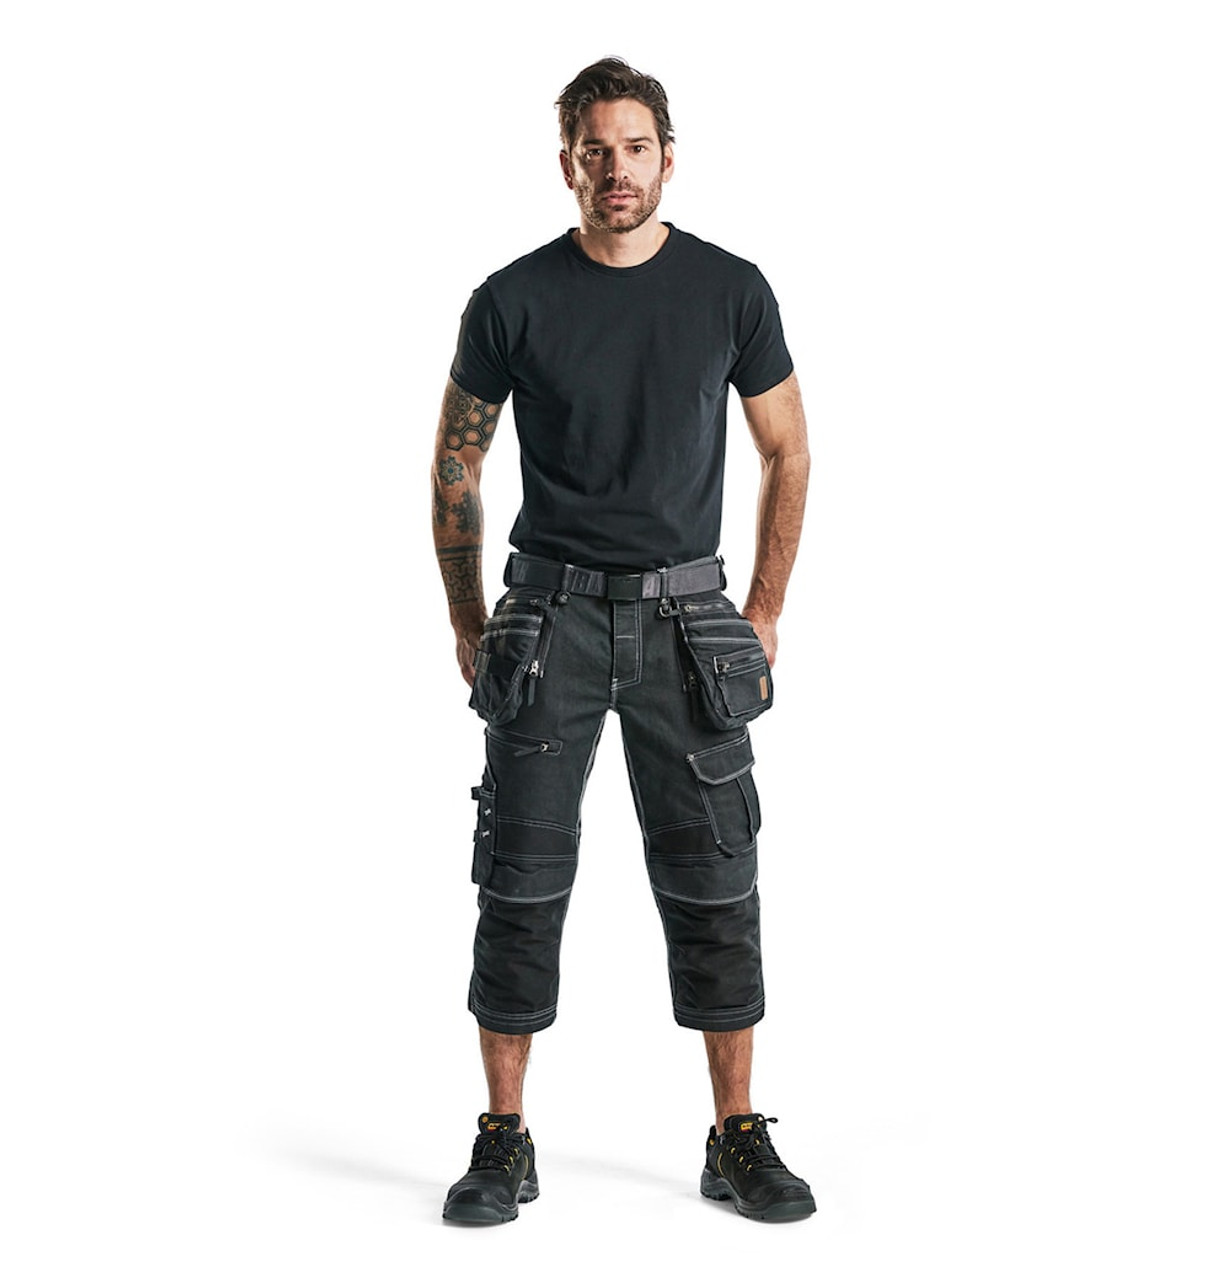 BLAKLADER Shorts 1991 with Kneepad Pockets  for BLAKLADER Shorts | 1991 Mens Craftsman Black Shorts with Kneepad Pockets Holster Pockets Denim with Stretch that have Configuration available in Carpentry